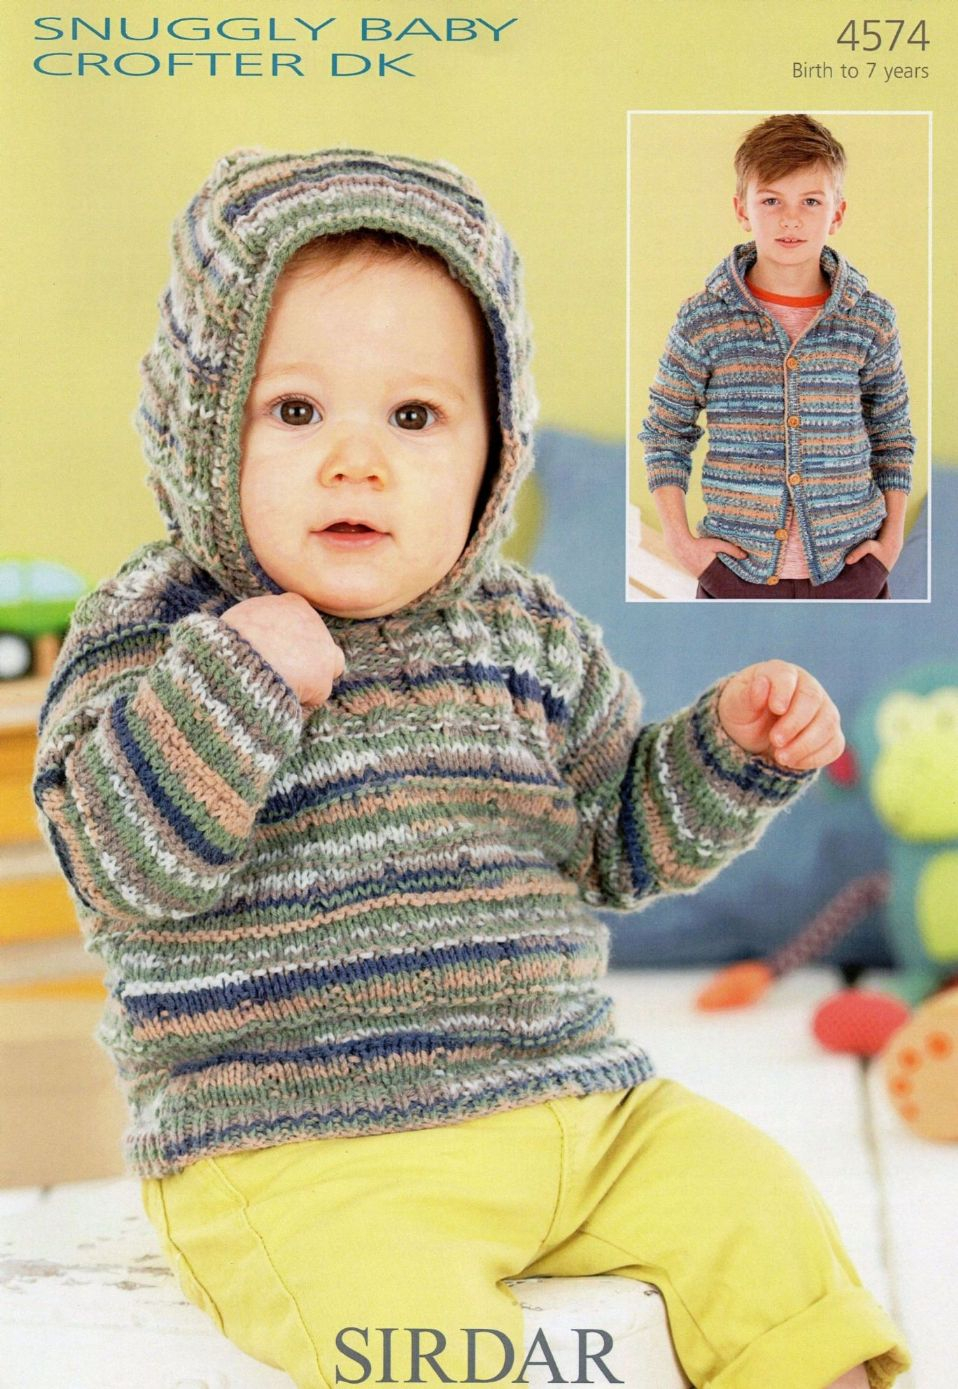 Sweater Jacket Knitting Pattern 4574 Sirdar Snuggly Ba Crofter Dk Sweater Jacket Knitting Pattern To Fit 0 To 7 Years